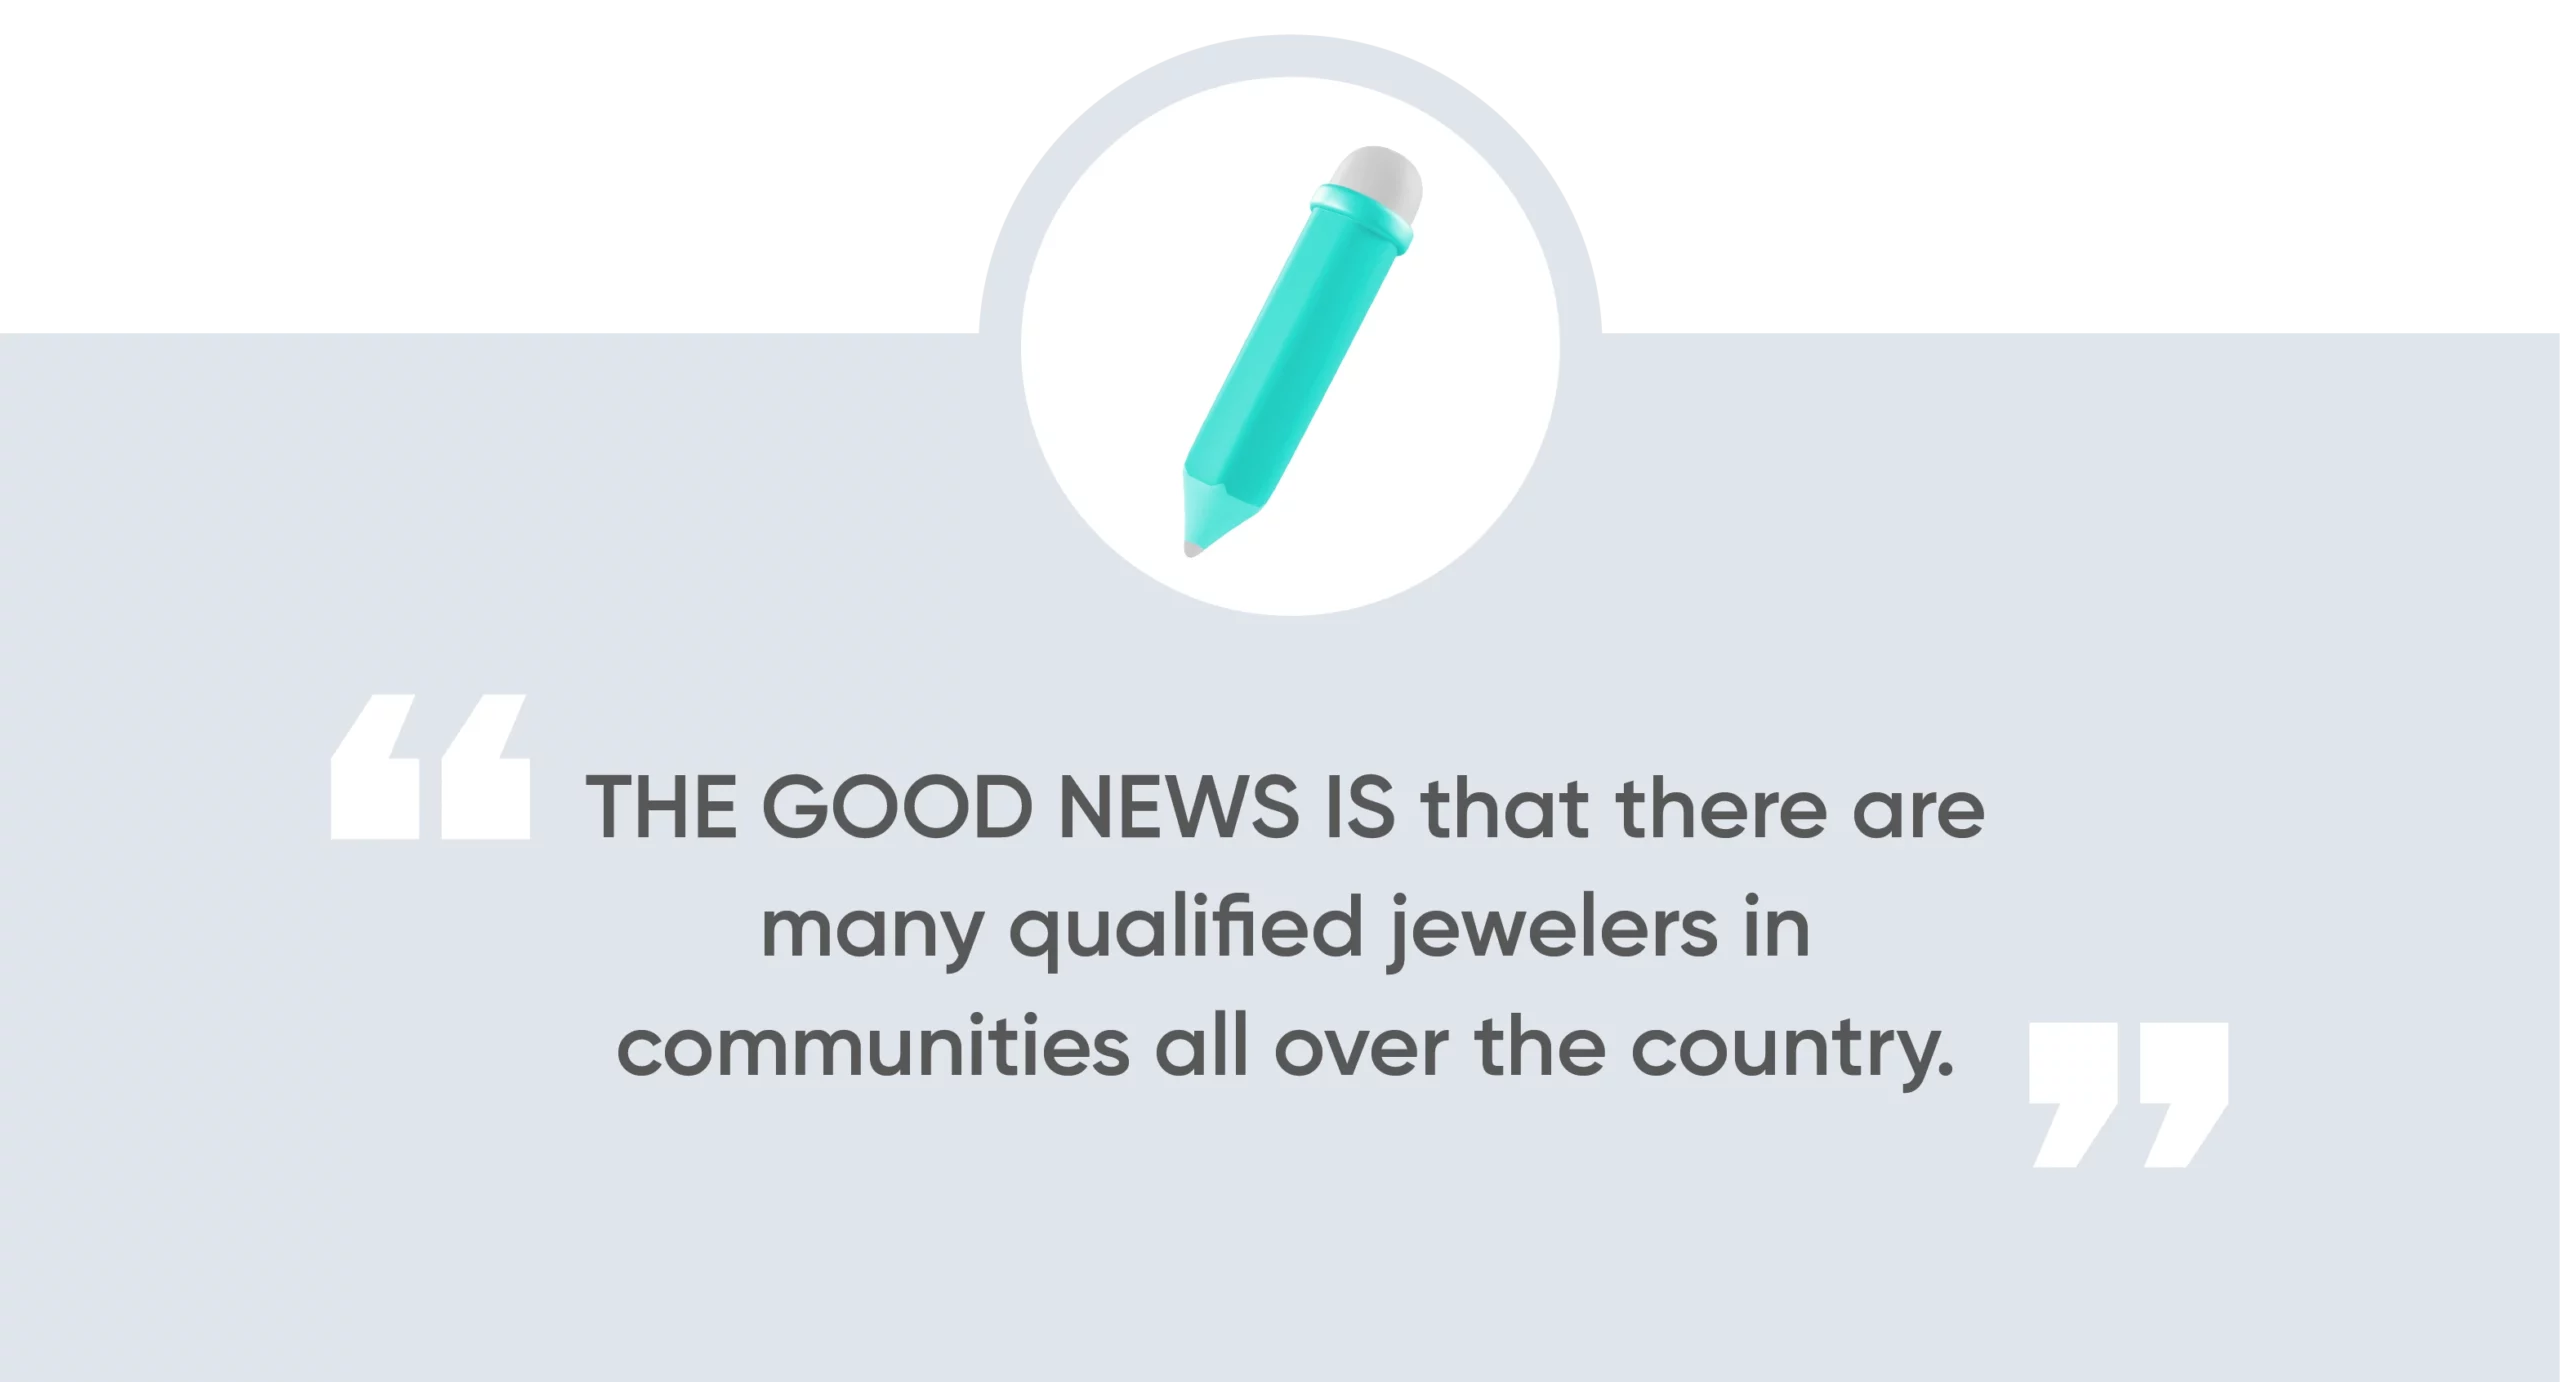 The good news is that there are many qualified jewelers in communities all over the country.